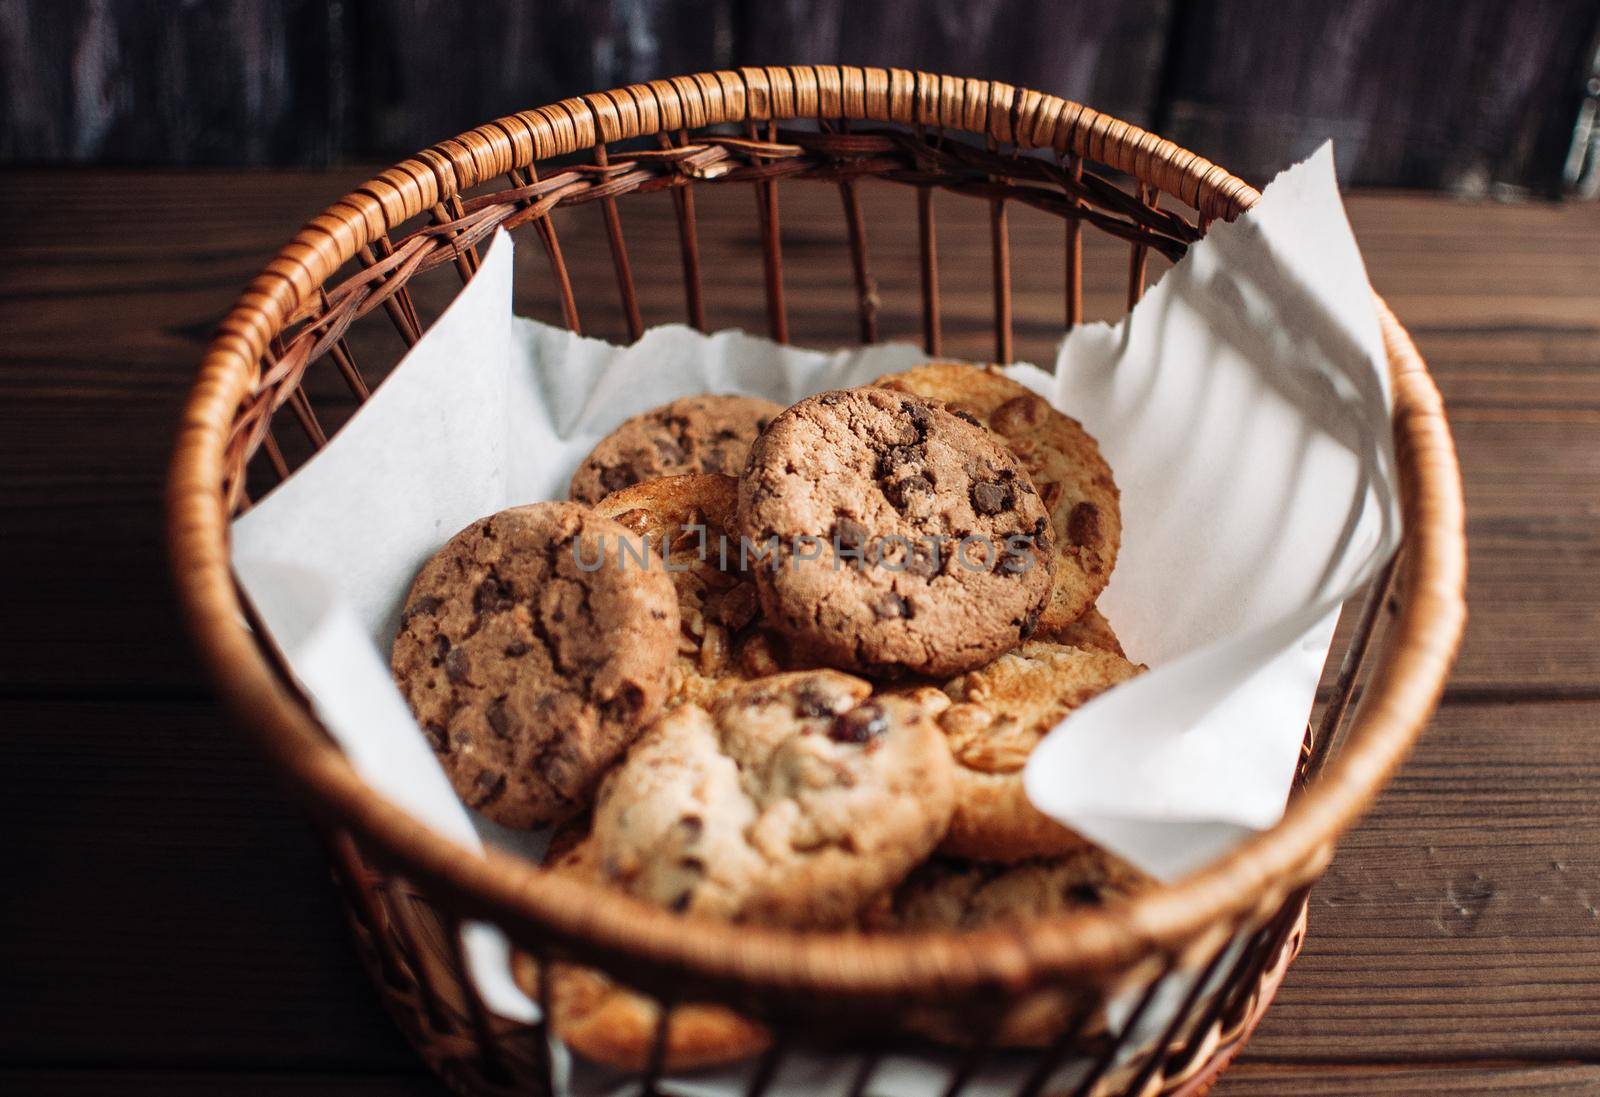 Cookies with chocolate lies in a wicker basket. A basket with gluten free cookies on a wooden table. Selective focus.